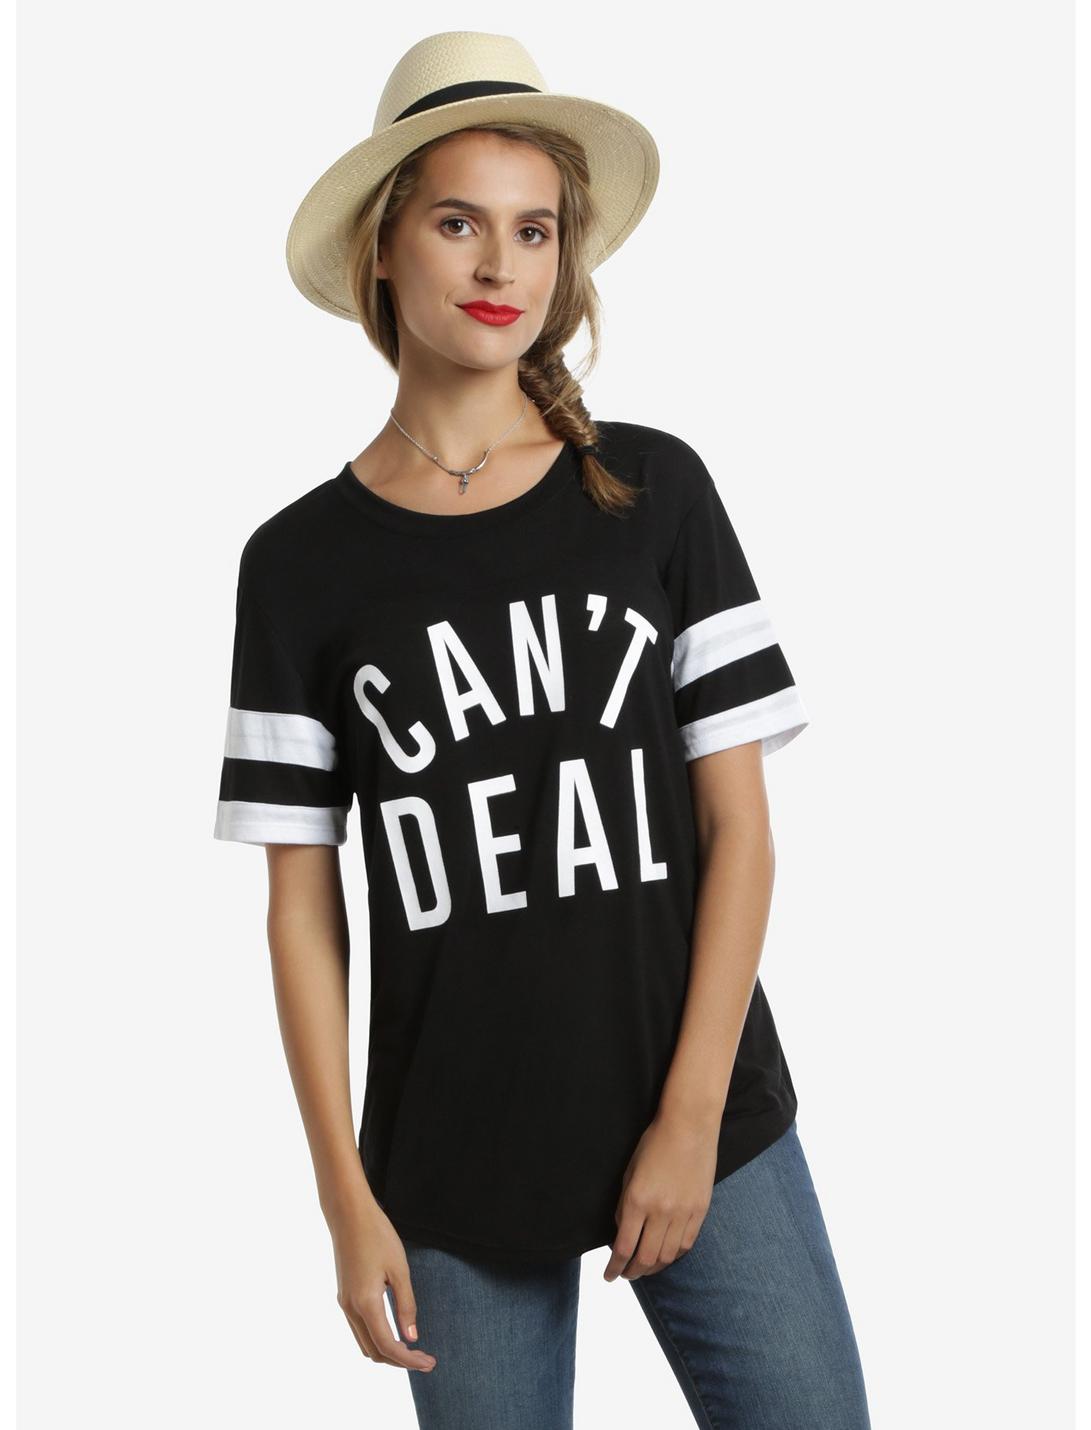 Can't Deal Womens Tee, BLACK, hi-res